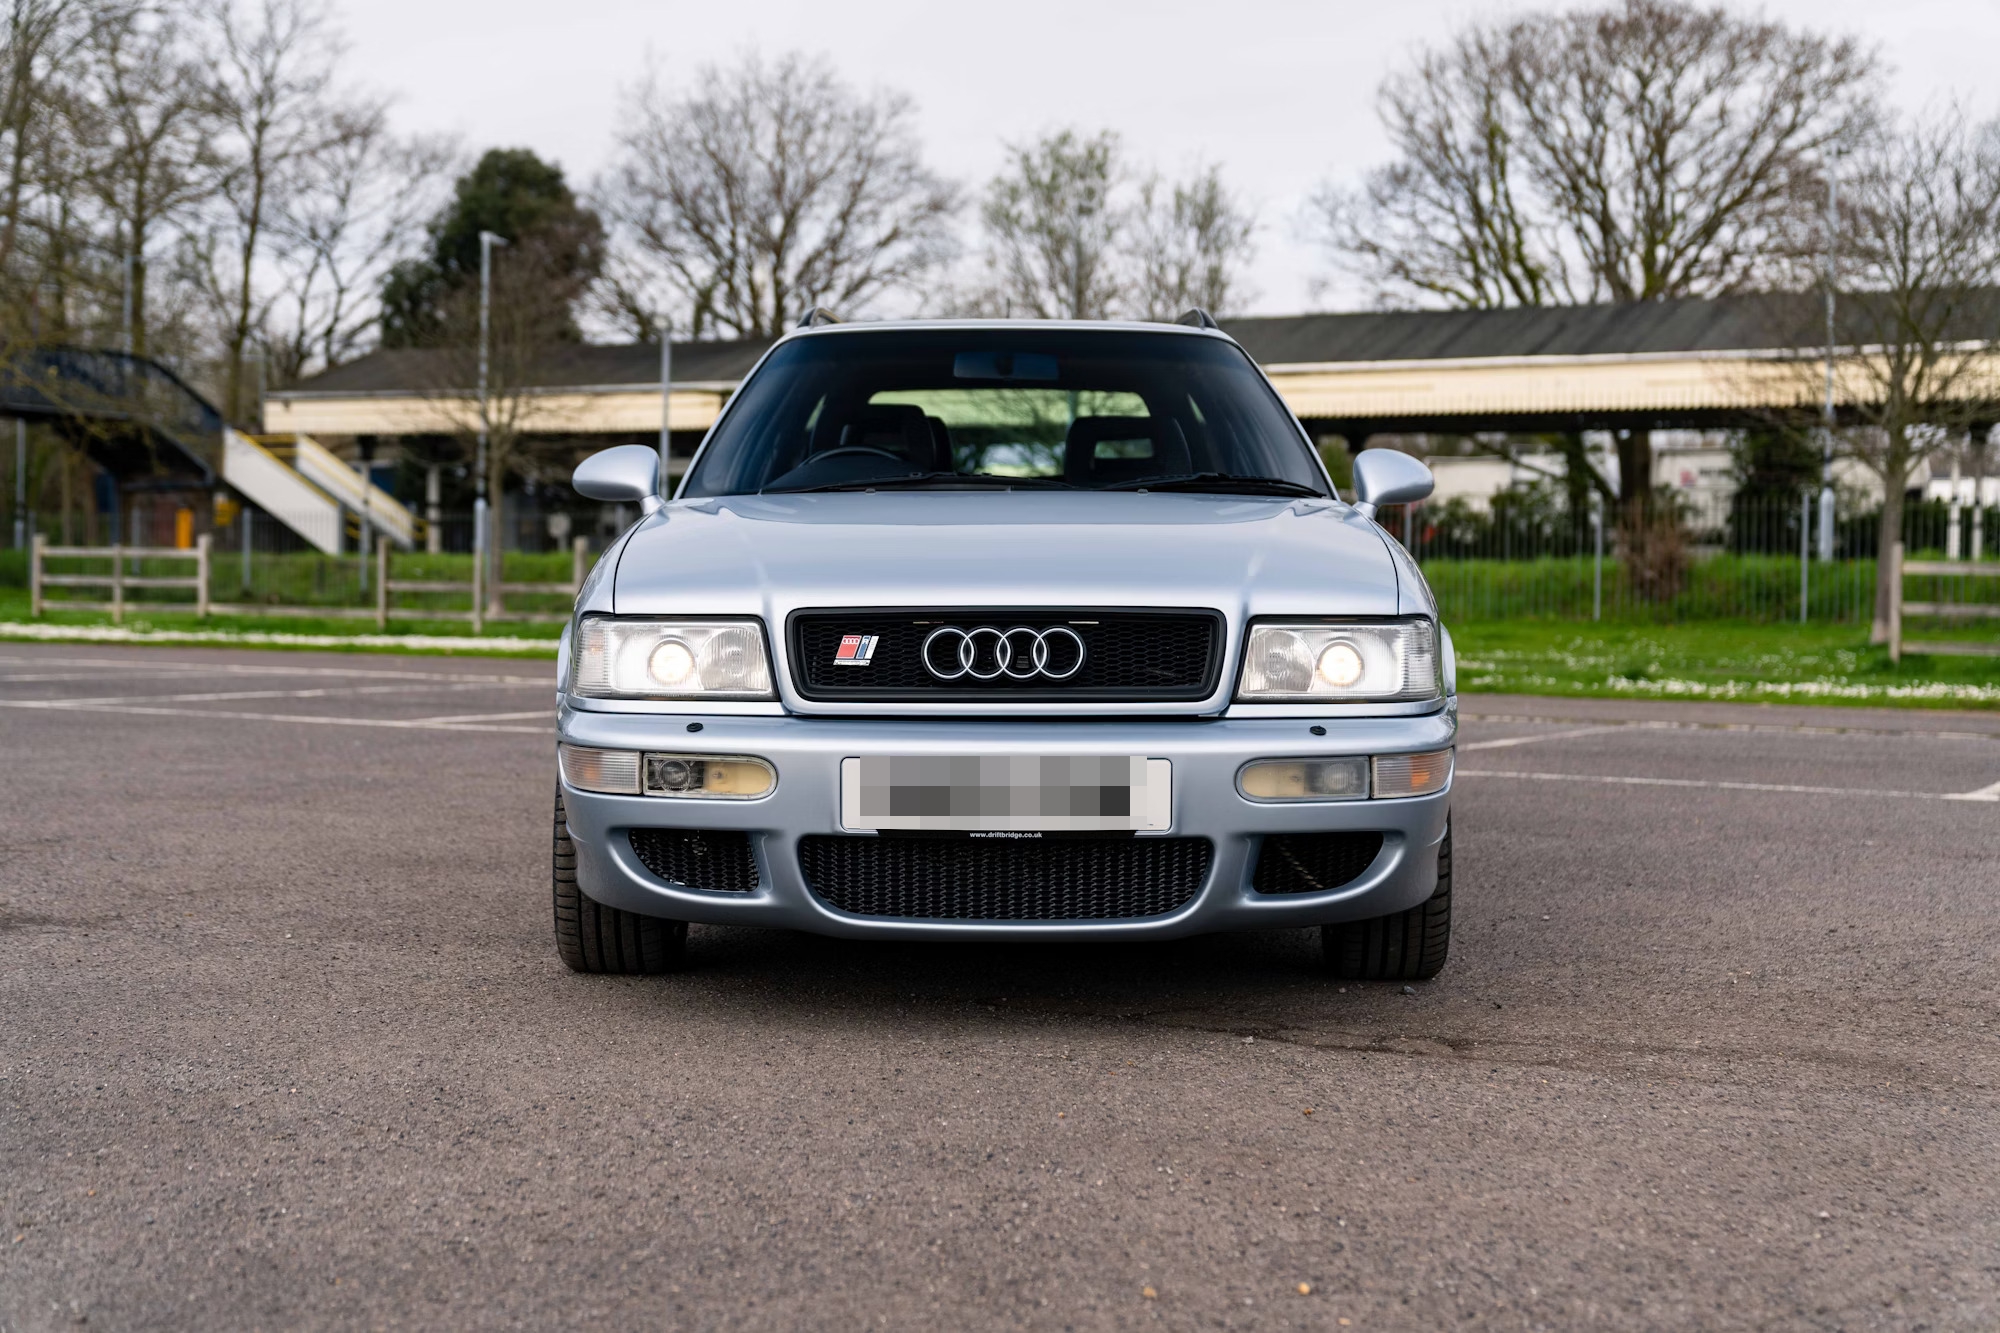 The super-quick Audi could sell for up to £40,000